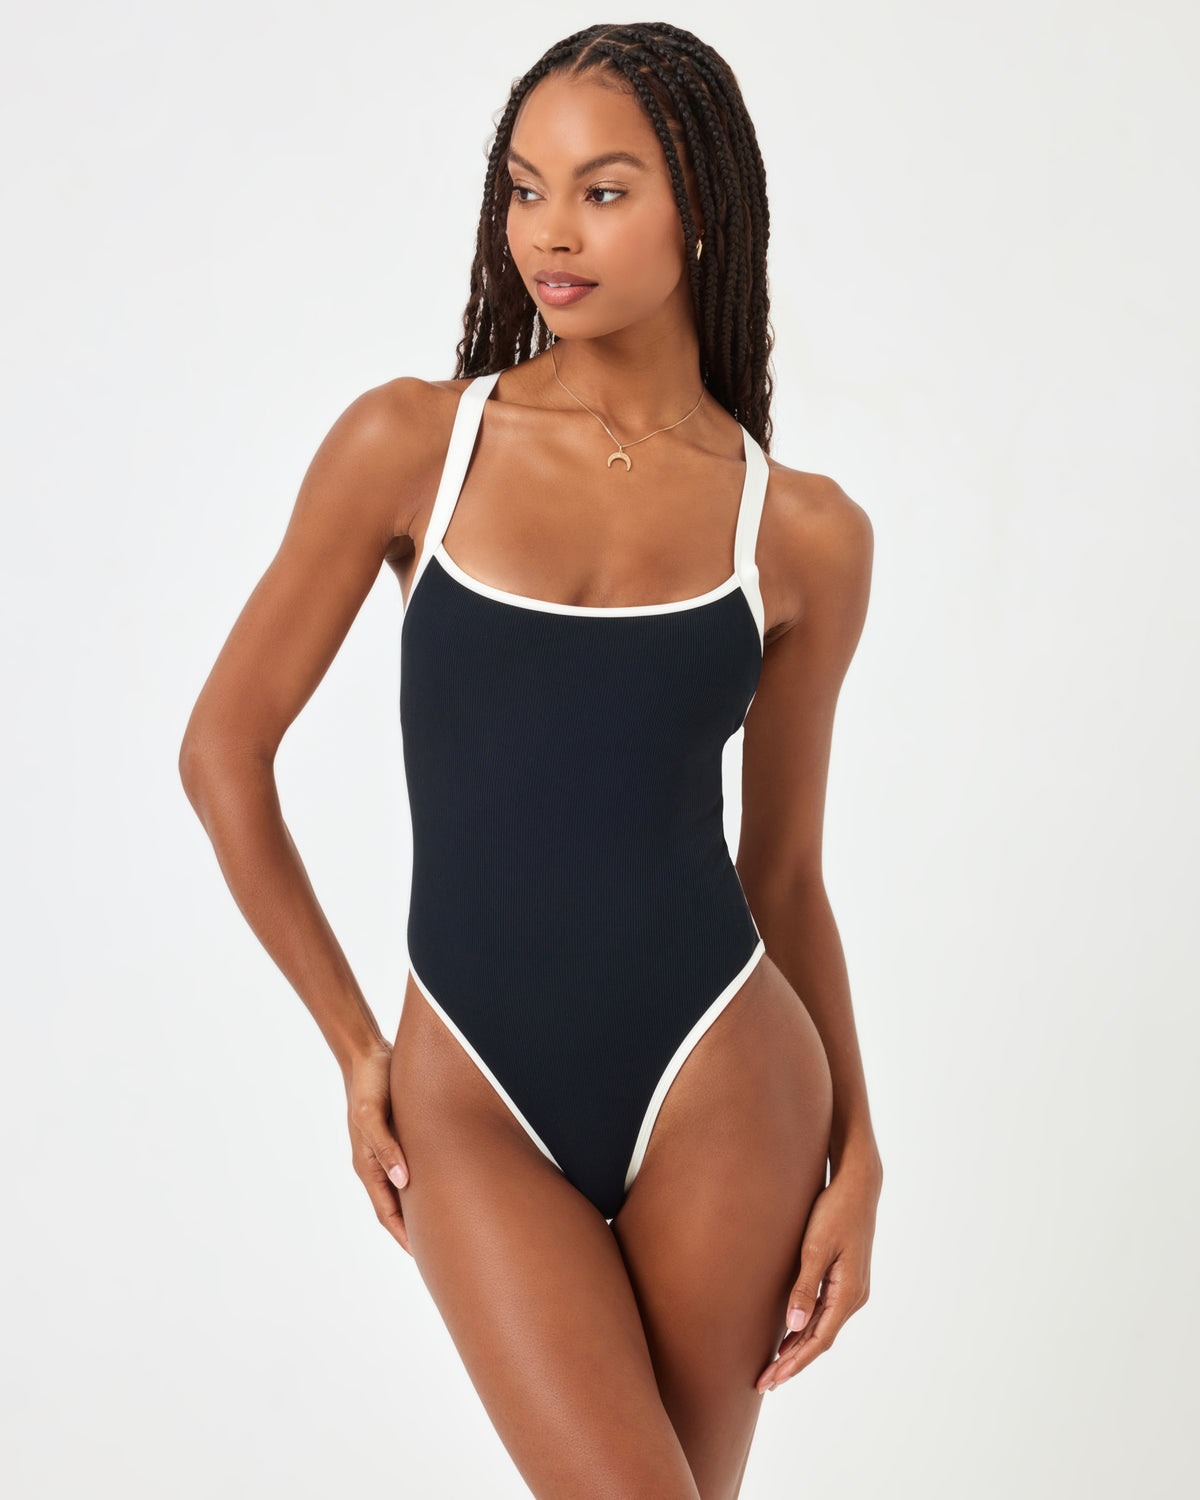 Ribbed Baewatch One Piece Swimsuit - Black-Cream Black | Model: Taelor (size: S) | Hover